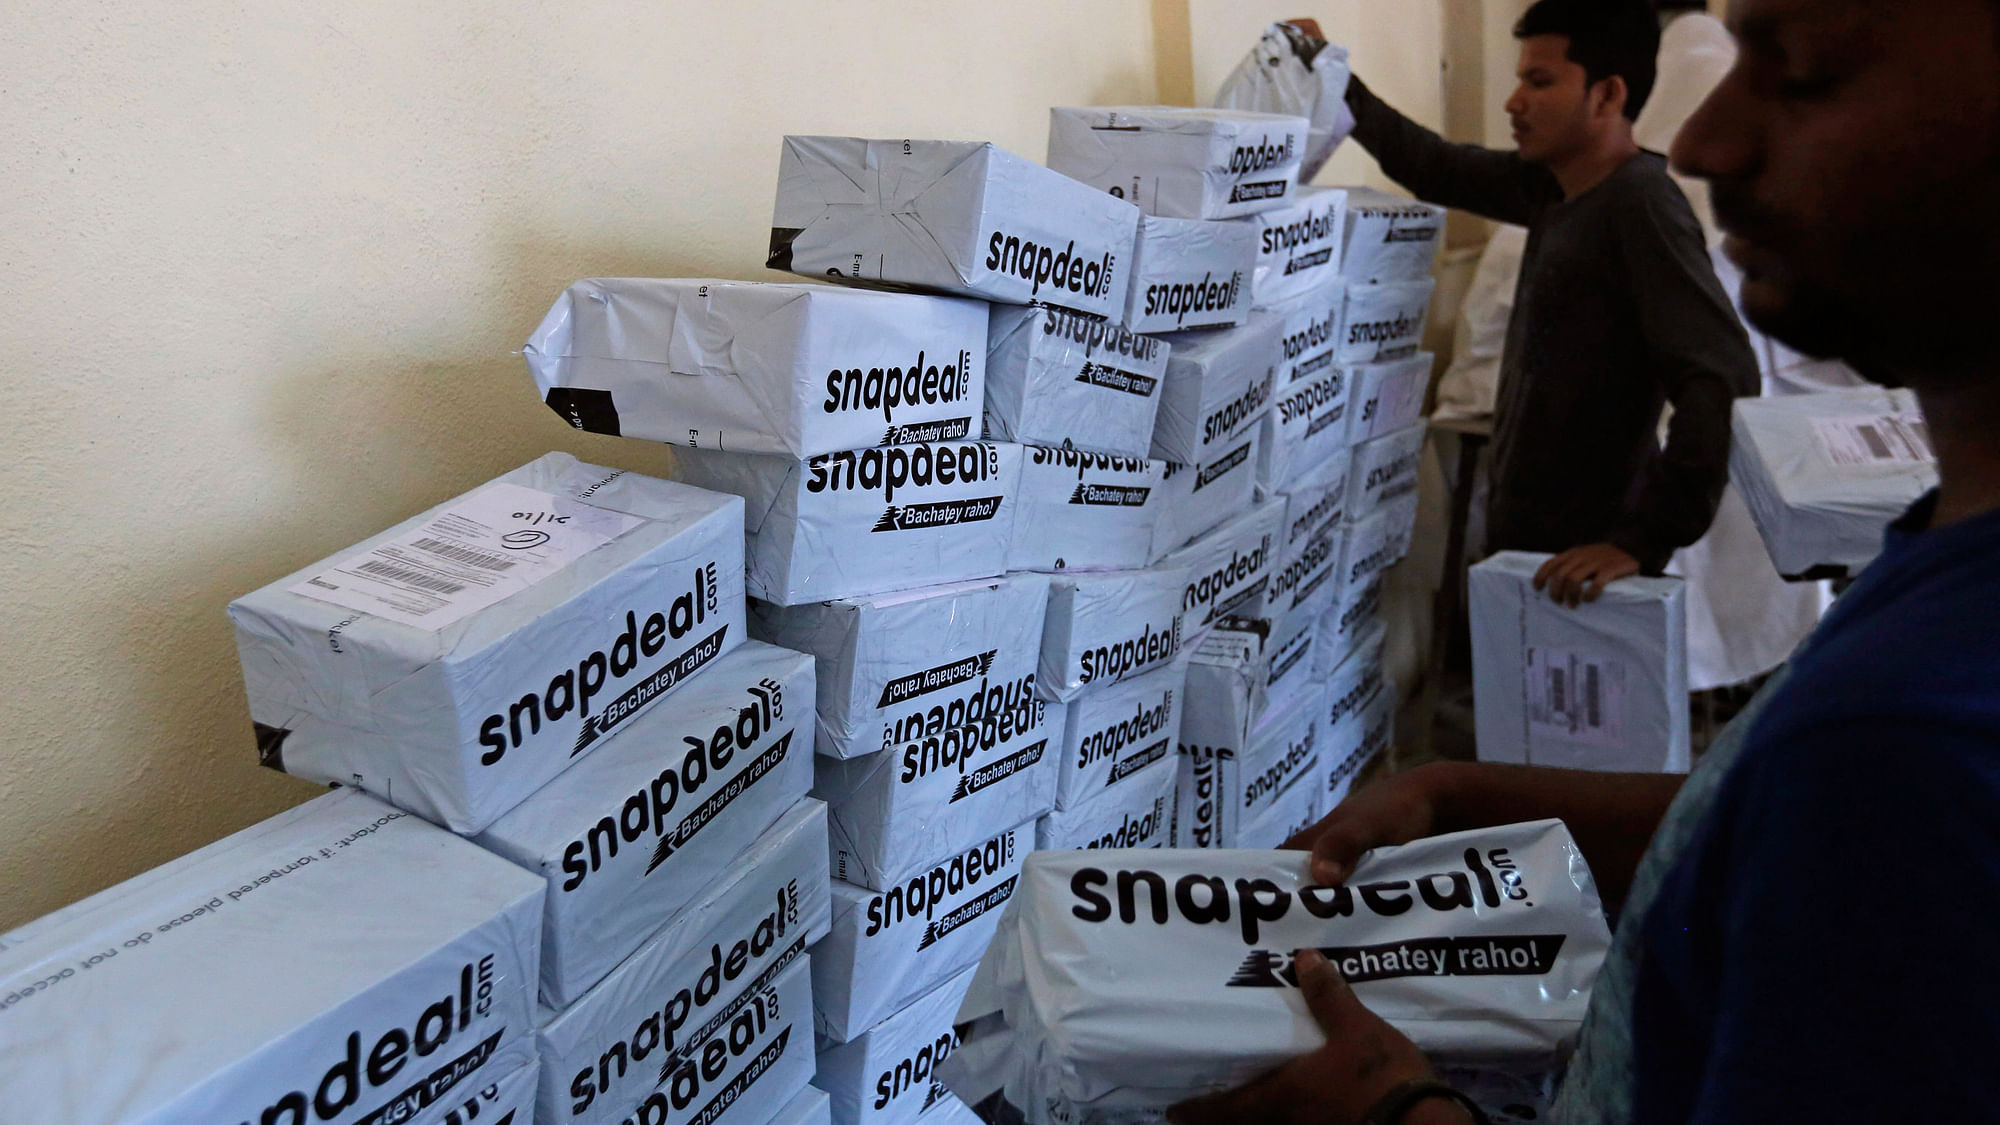 Snapdeal will lay off around 600 people across its e-commerce, logistics (Vulcan) and digital payments (Freecharge) businesses  over the next few days (Photo: Reuters)